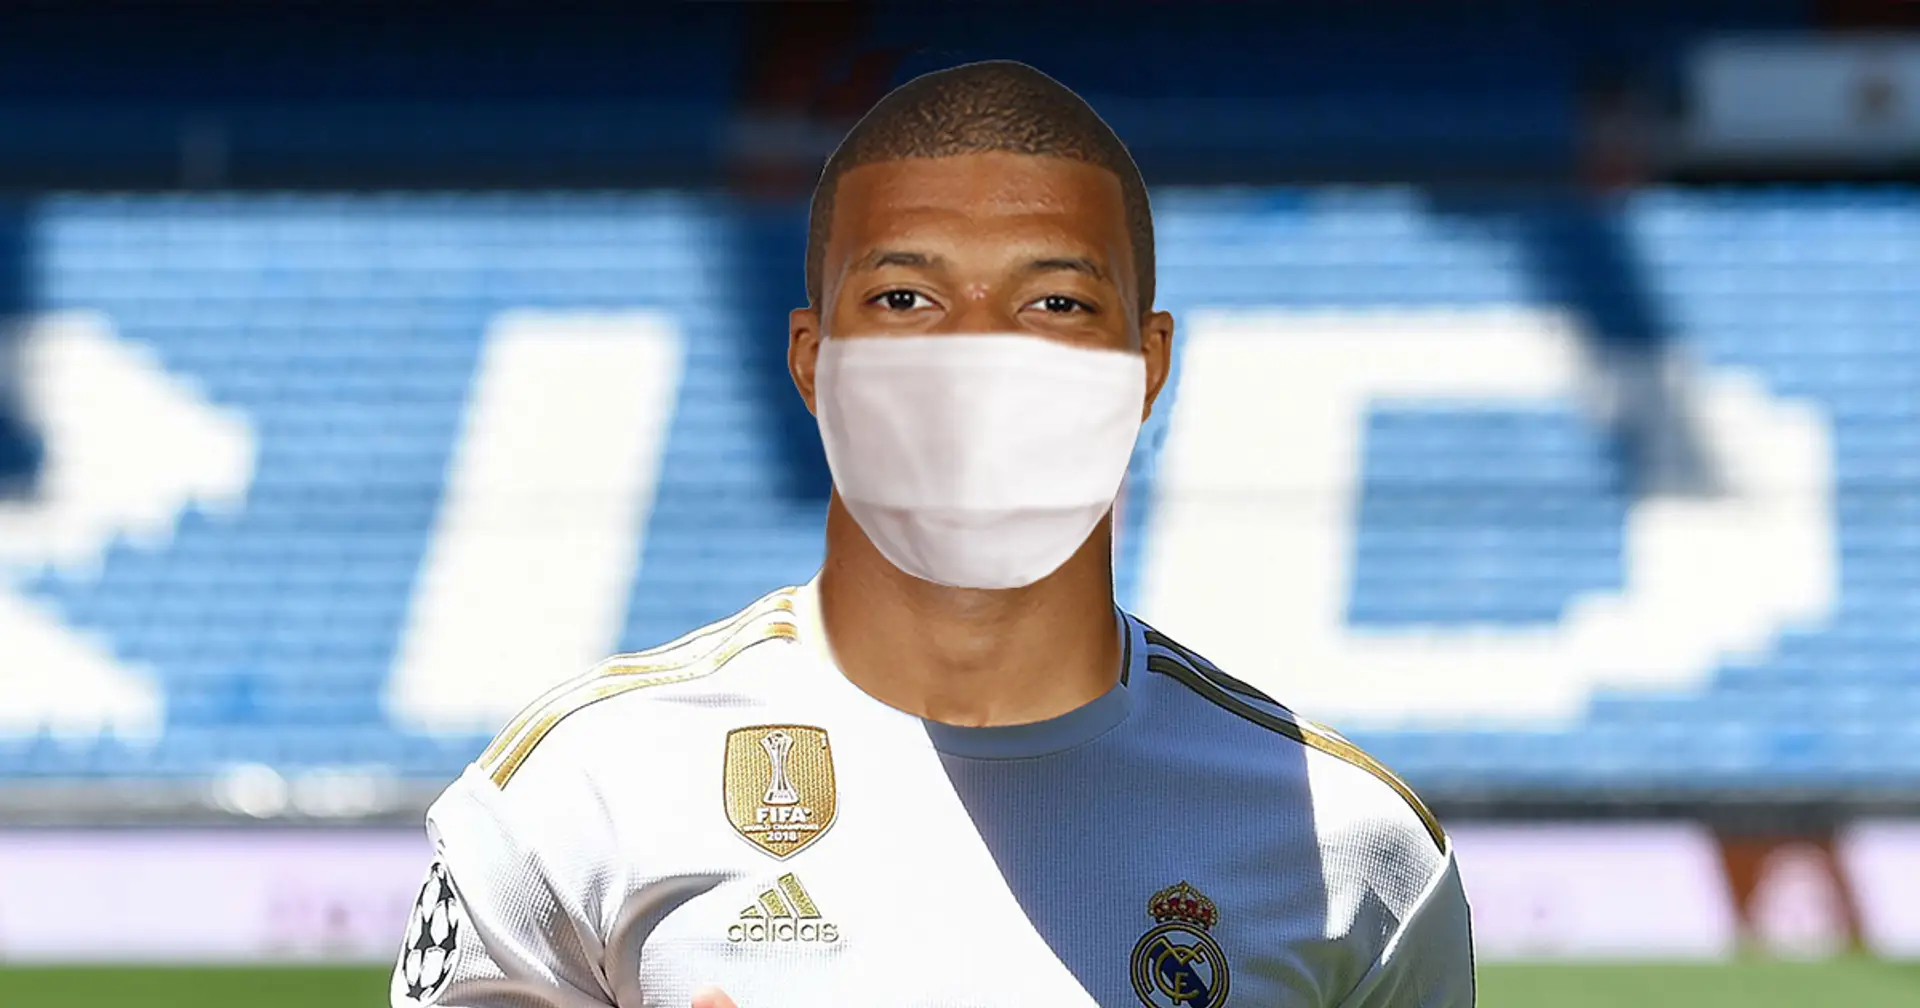 🚨 BREAKING: Kylian Mbappe signs for Real Madrid